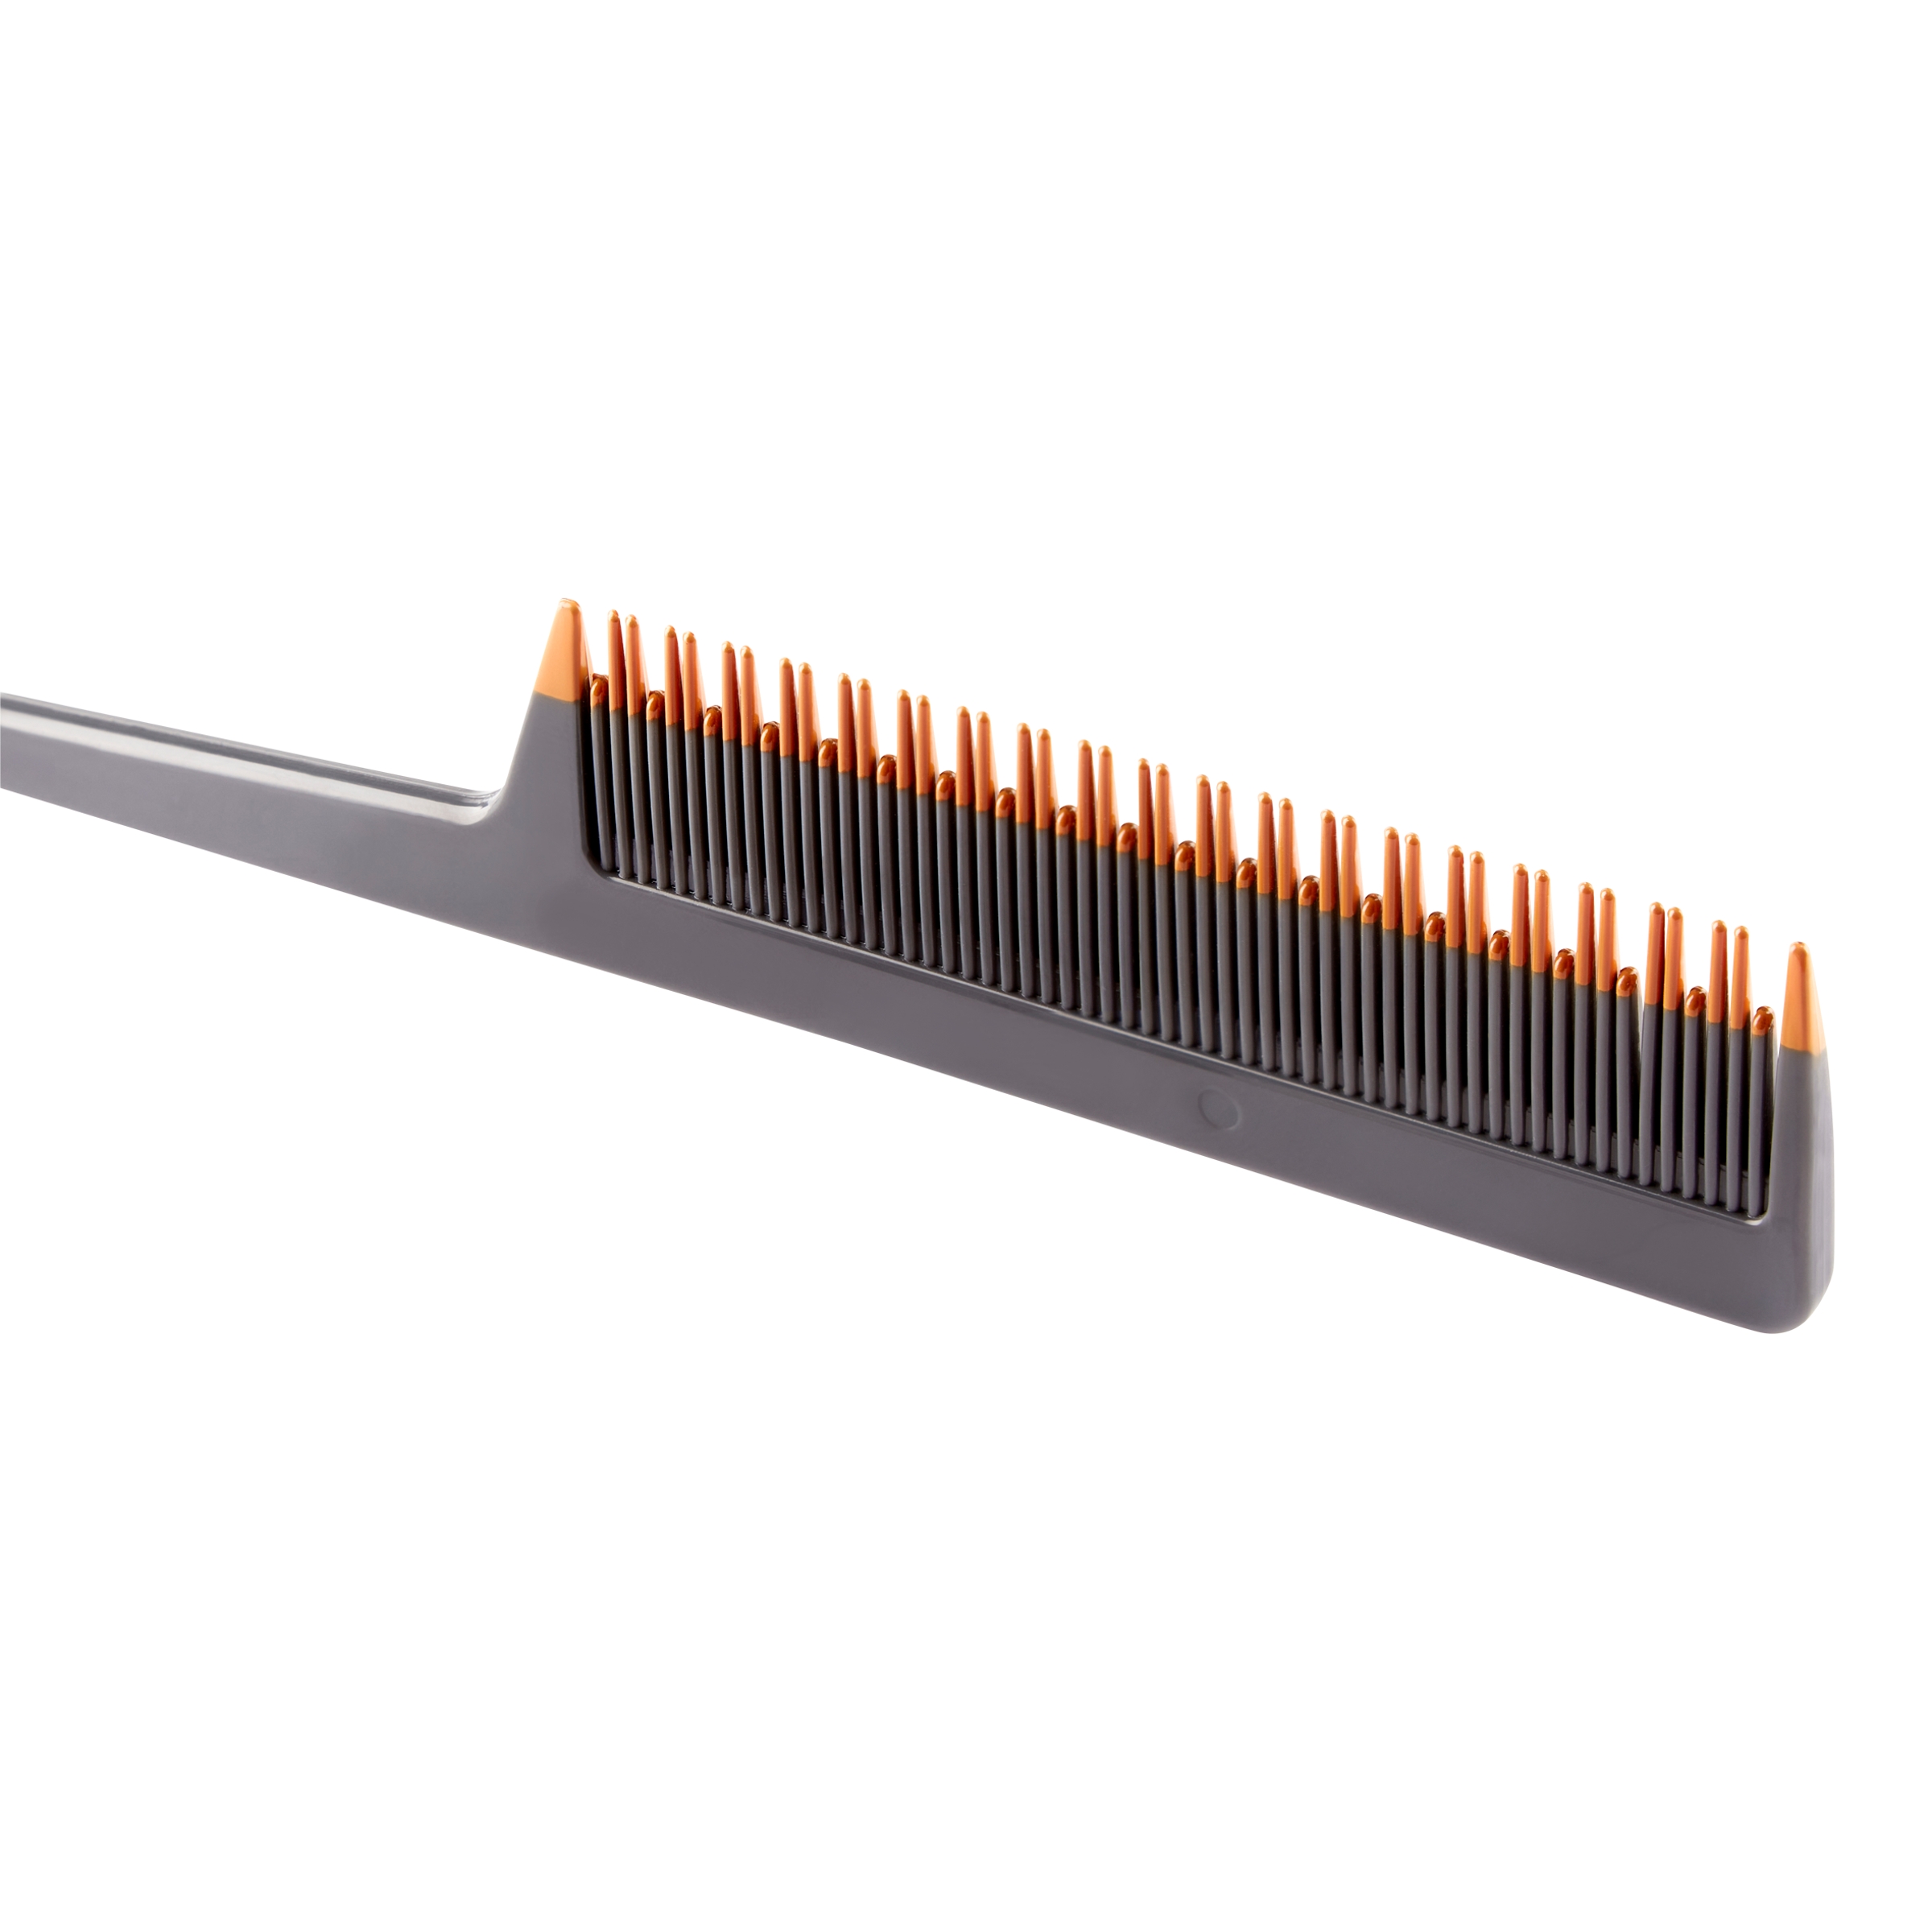 Goody® Volume Boost Teasing Comb and Boar Bristle Brush Kit, 2 CT - image 5 of 7